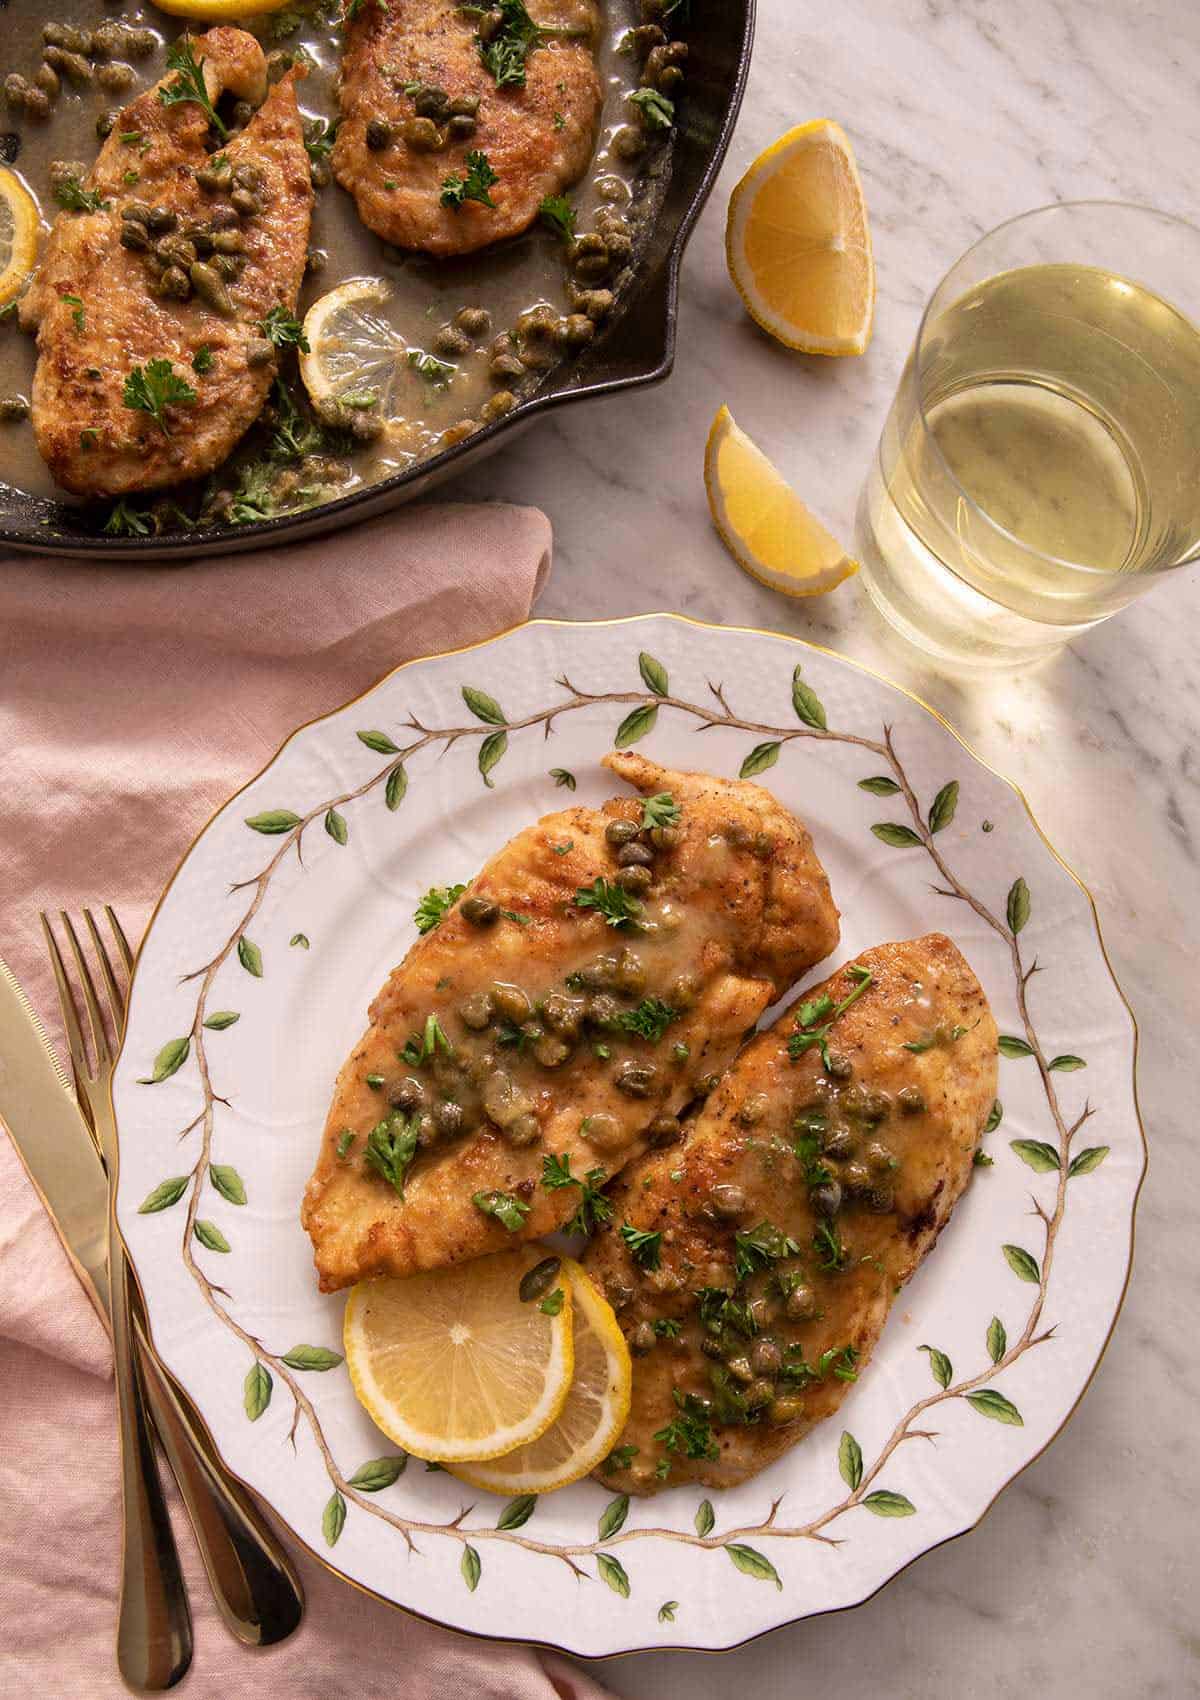 Overhead view of a plate with two servings of chicken piccata by a glass of wine.